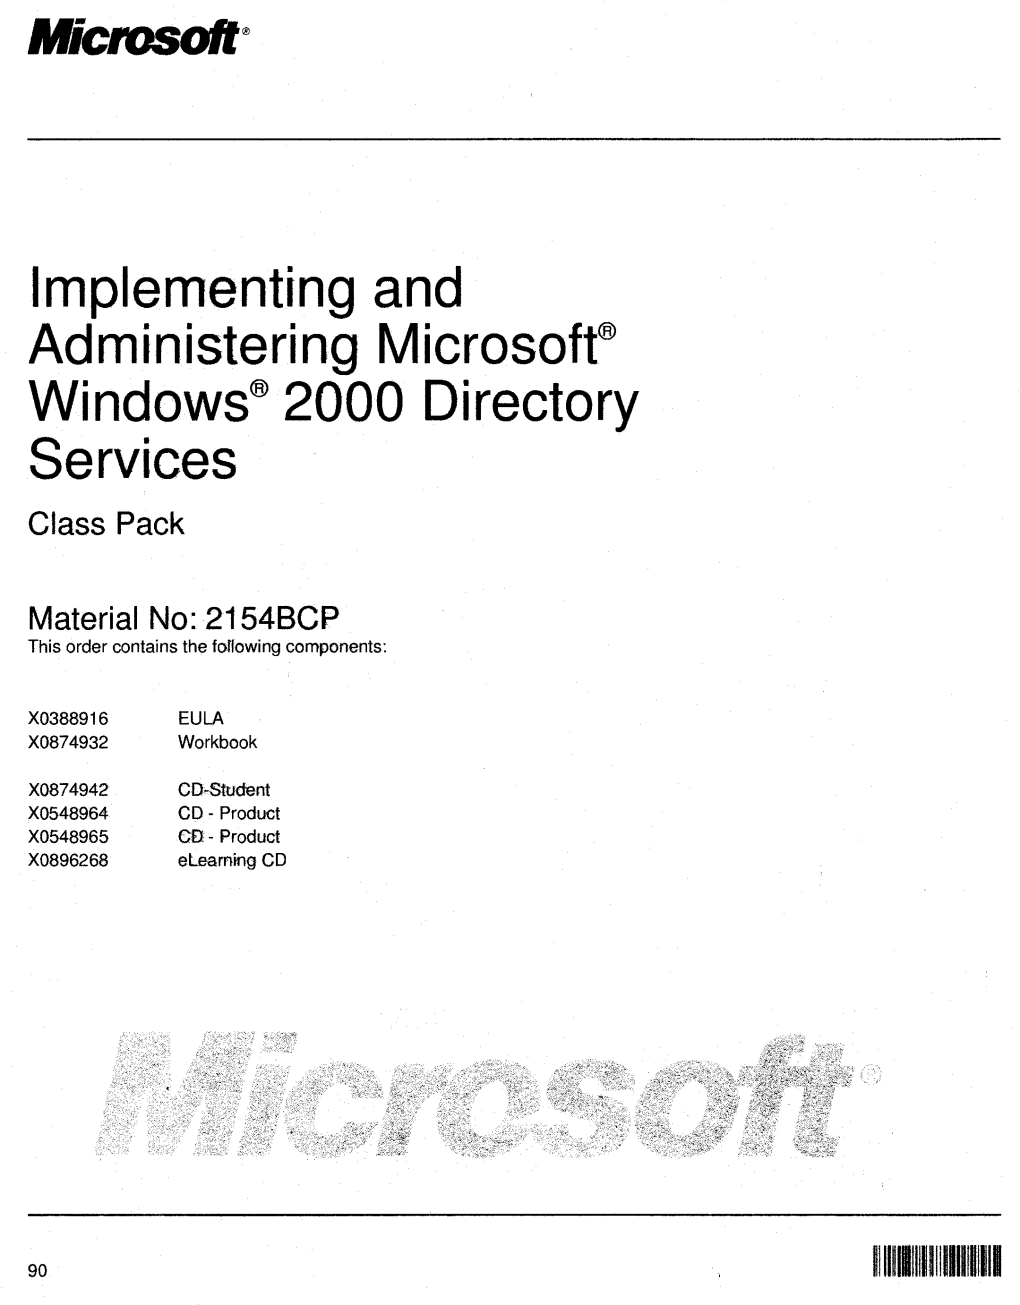 Implementing and Administering Microsoft® Windows® 2000 Directory Services Class Pack